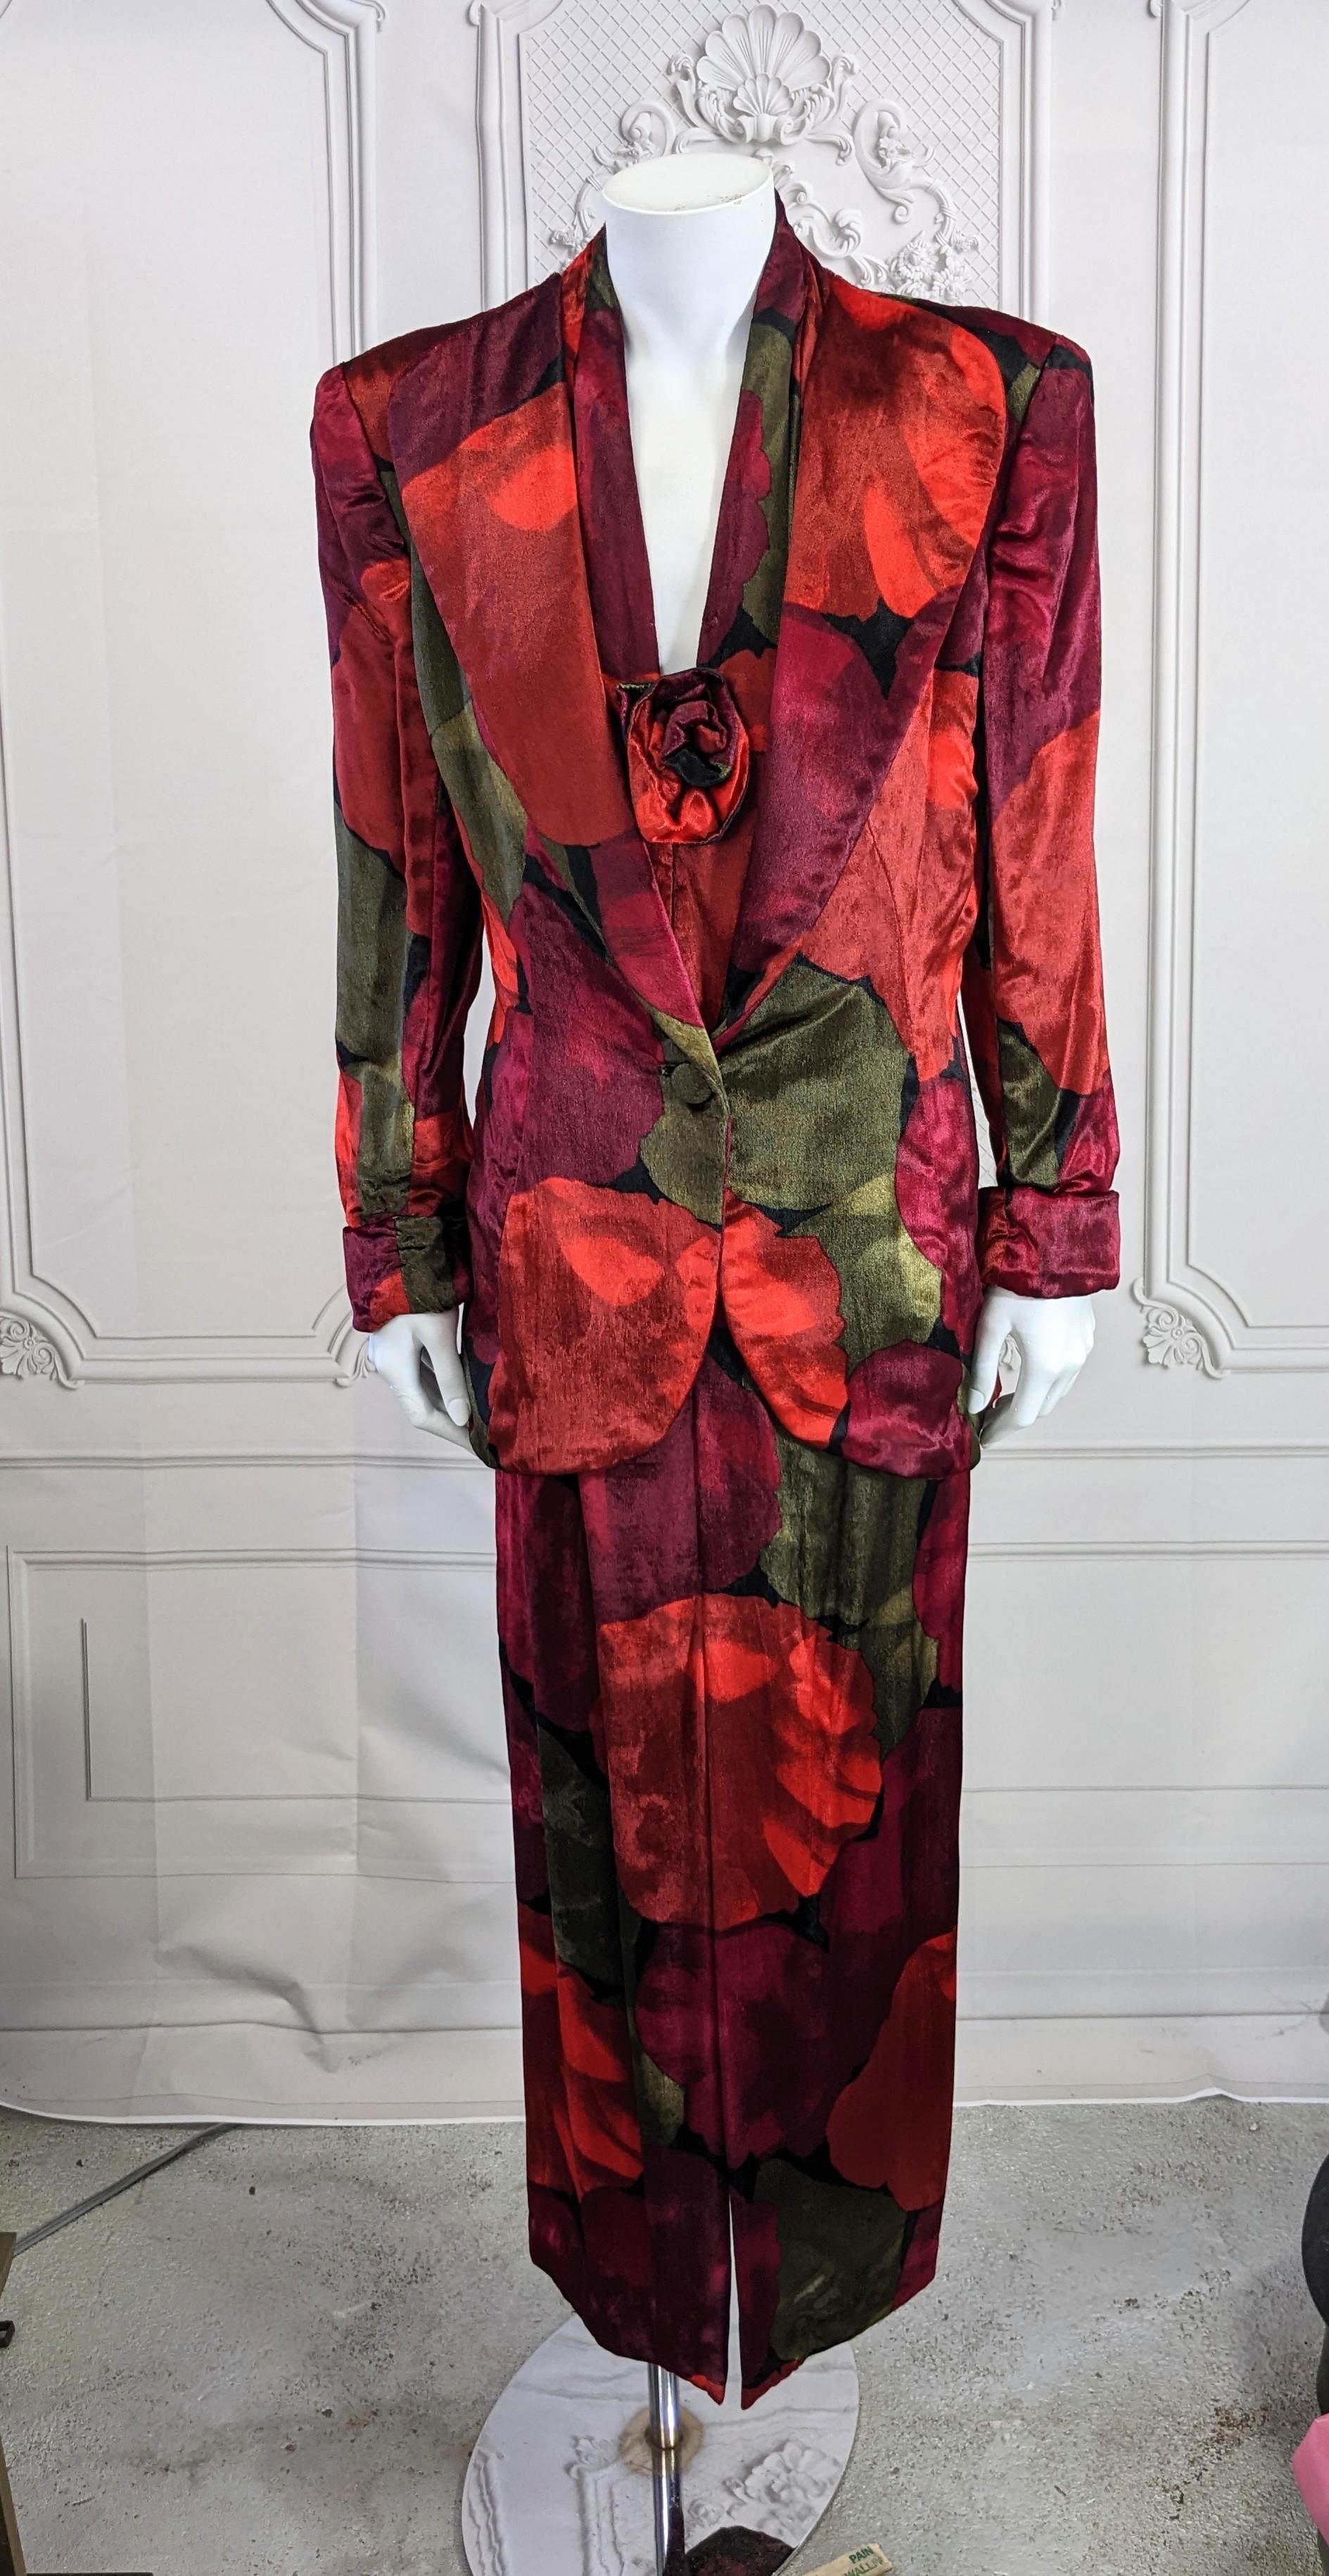 Chic Pauline Trigere Silk Velvet Evening Suit comprised of a sharply tailored blazer and halter gown. 2 great pieces which can be used as separates. 
Great blazer with wide lapels which buttons low with a single button. Halter dress has draped